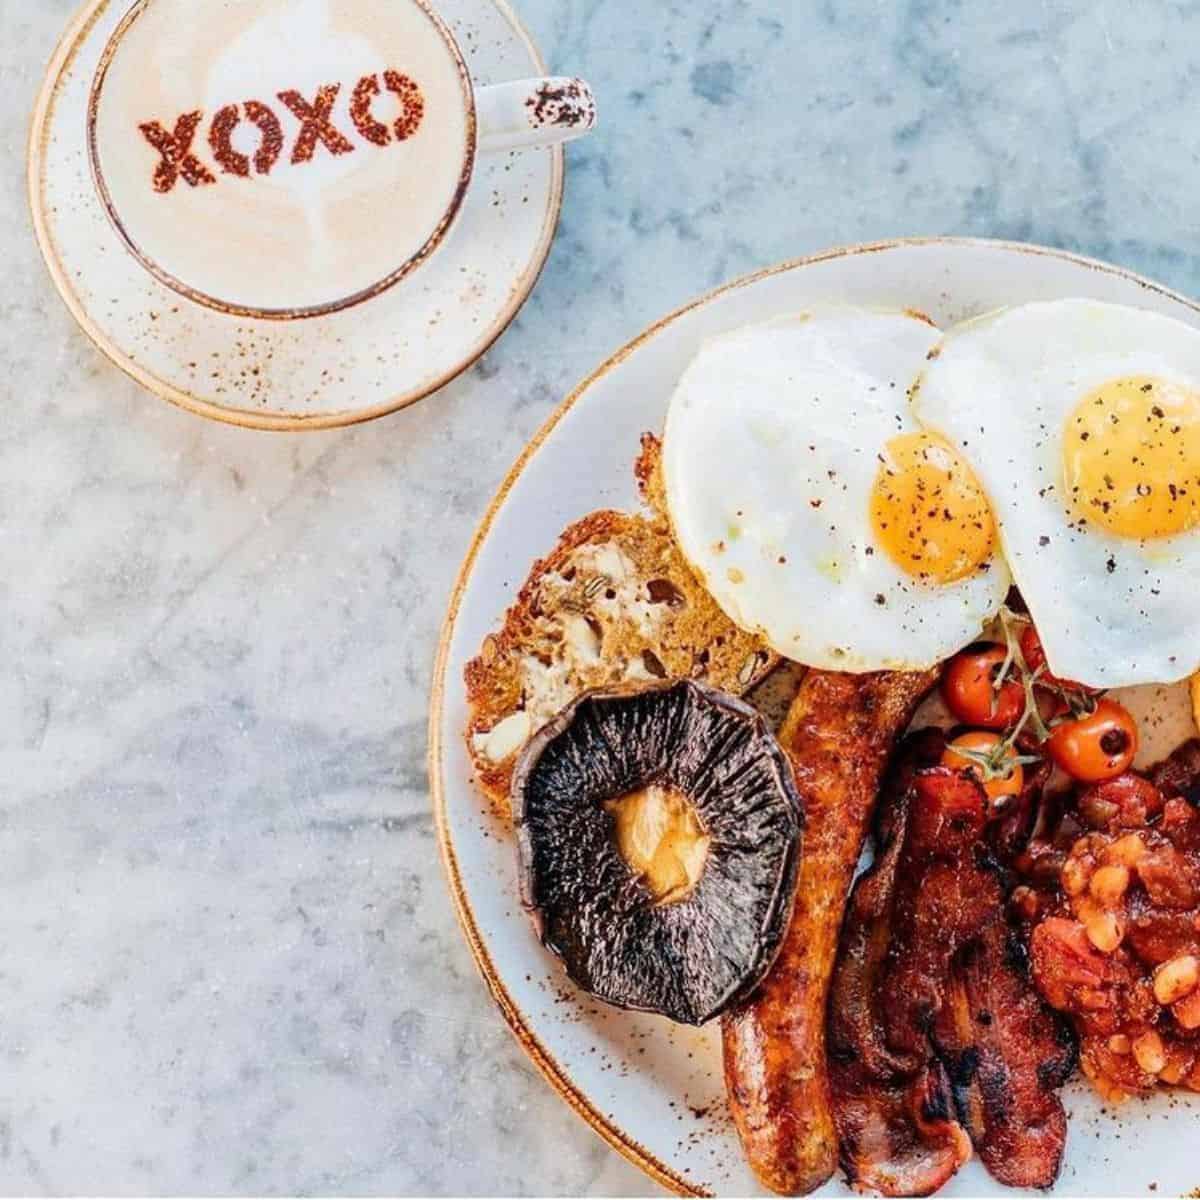 xoxo brunch plate and coffee